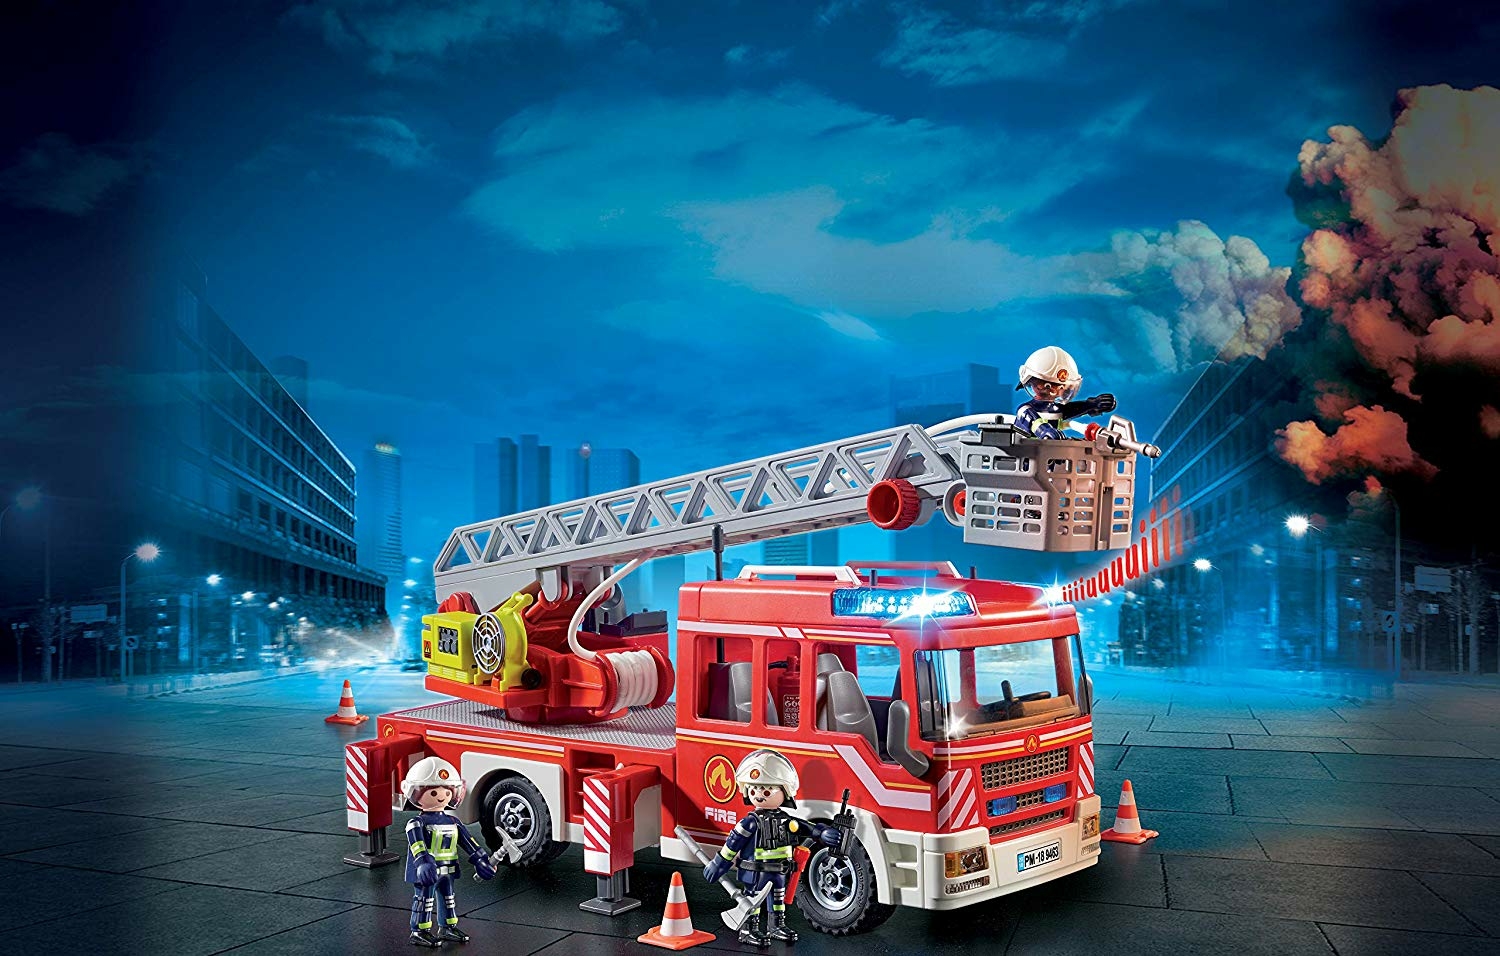 https://www.reference-gaming.com/assets/media/product/62124/playmobil-9463-camion-pompiers-echelle-pivotante-5d5a9d5e0ecb8.jpg?format=product-cover-large&k=1566219614